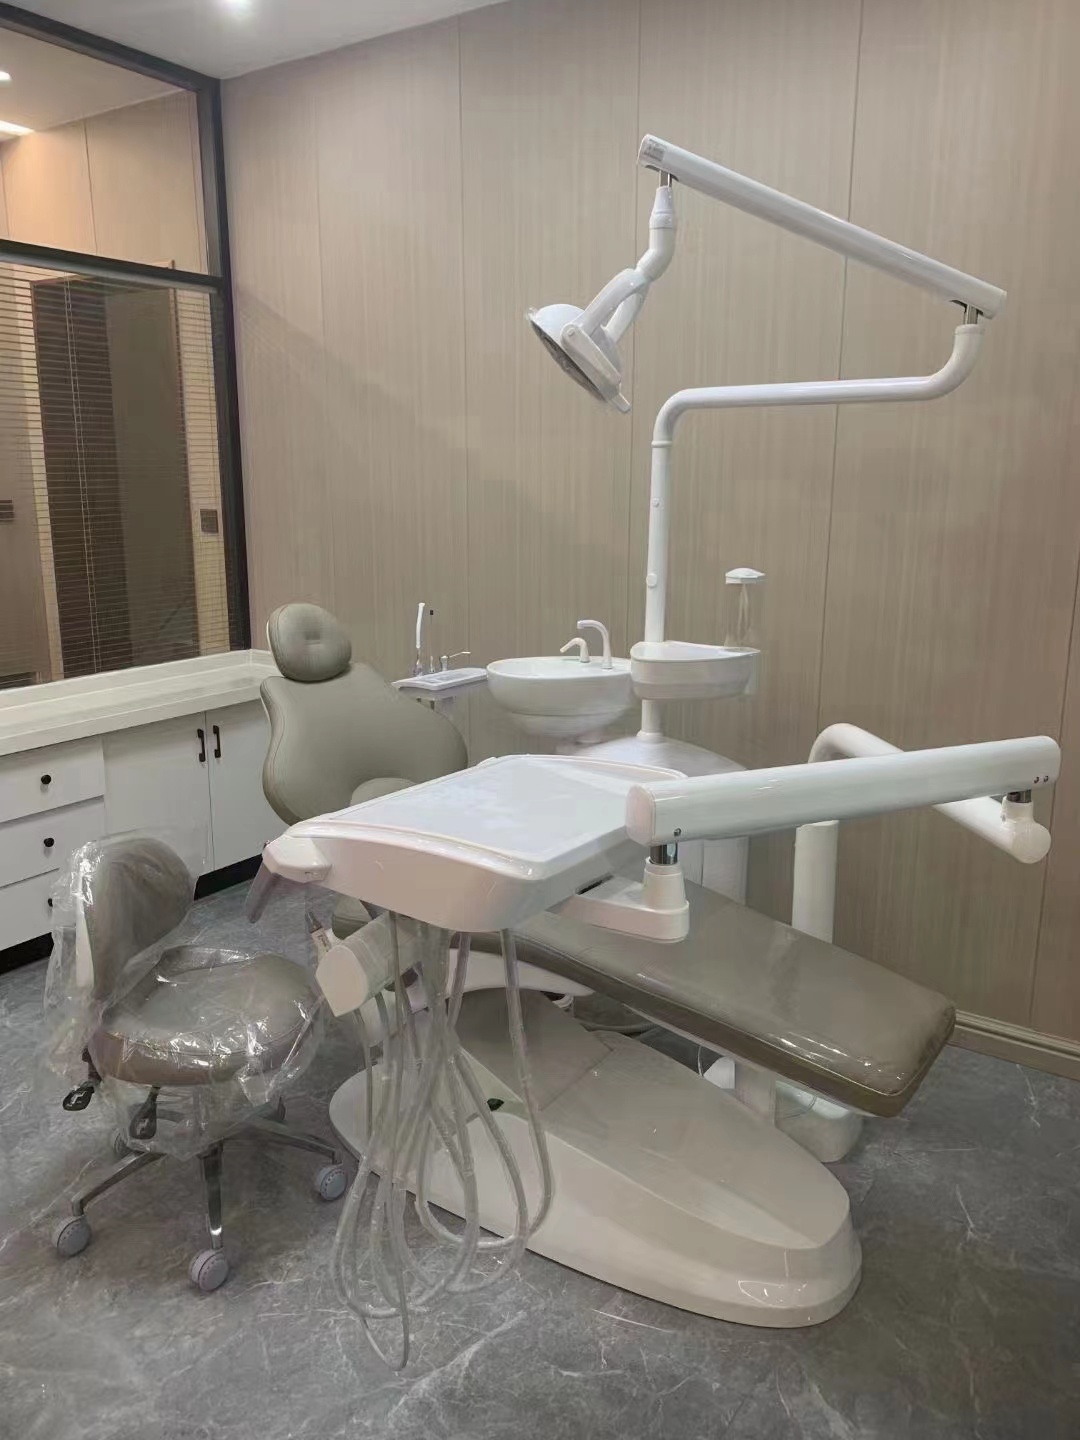 Troubleshooting of weak suction function of dental chair